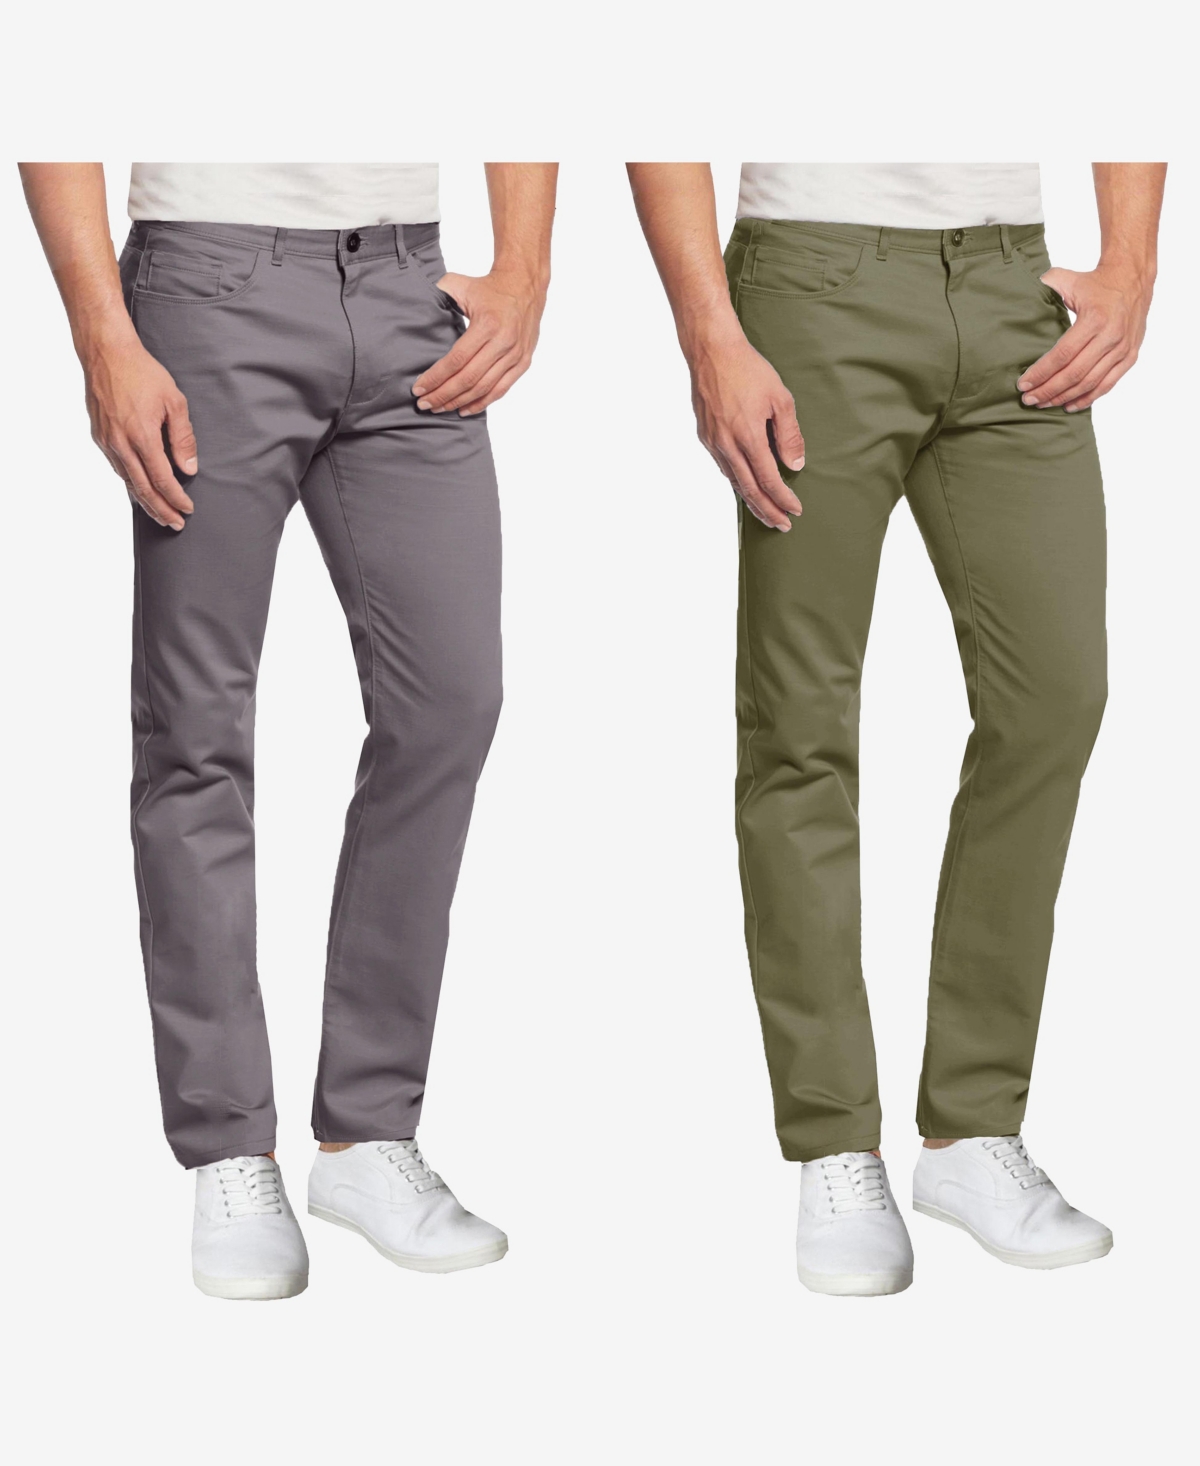 Galaxy By Harvic Men's 5-pocket Ultra-stretch Skinny Fit Chino Pants, Pack Of 2 In Olive,dark Gray